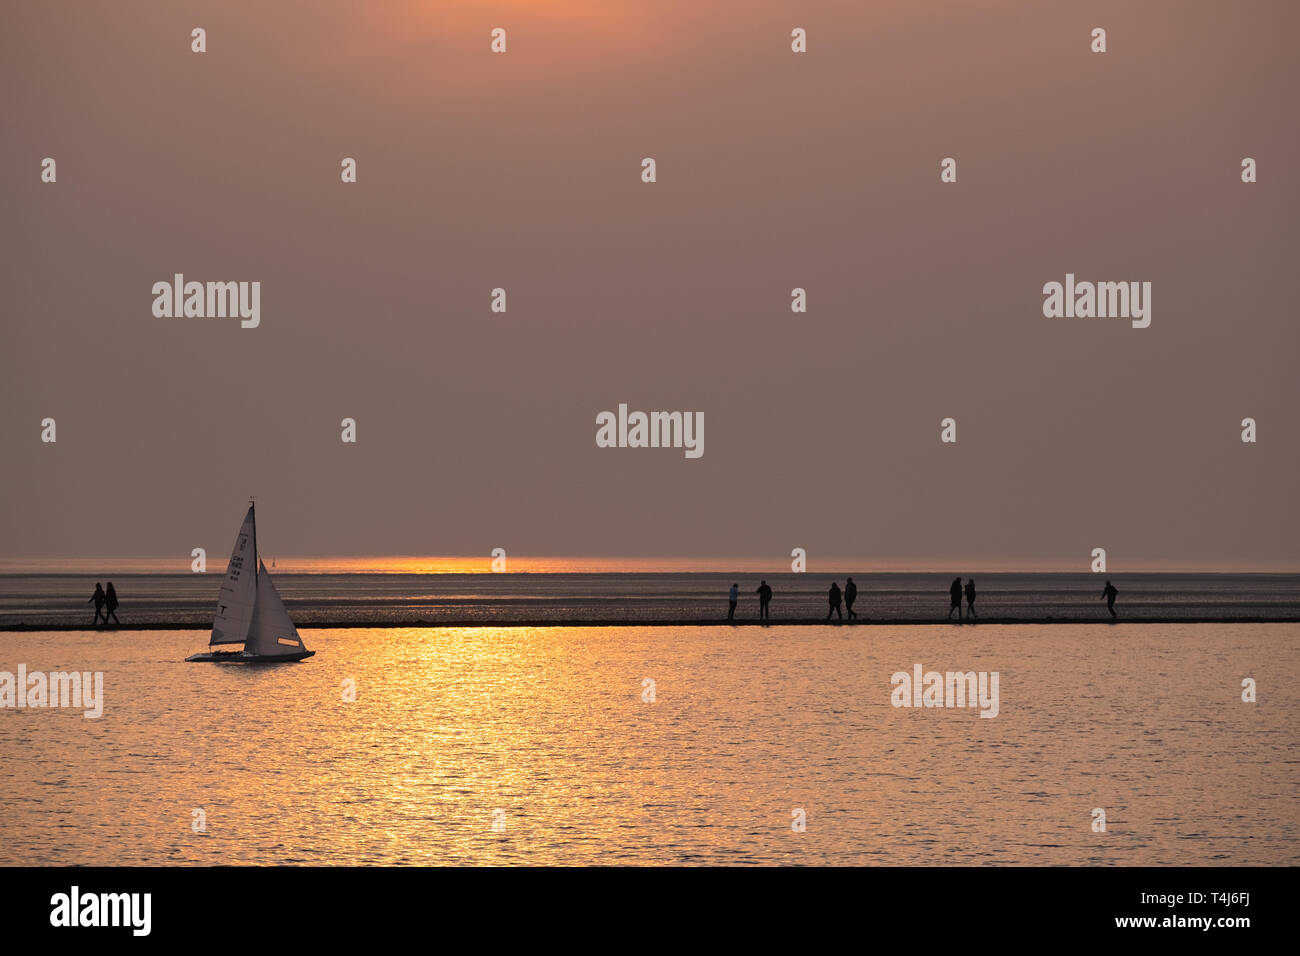 West Kirby, Wirral, UK. April 17, 2019. People enjoying an evening walk at the marine lake in West Kirby on the Wirral in north west England on Wednesday, April 17, 2019 as temperatures are set to rise ahead of the upcoming bank holiday weekend. Credit: Christopher Middleton/Alamy Live News Stock Photo